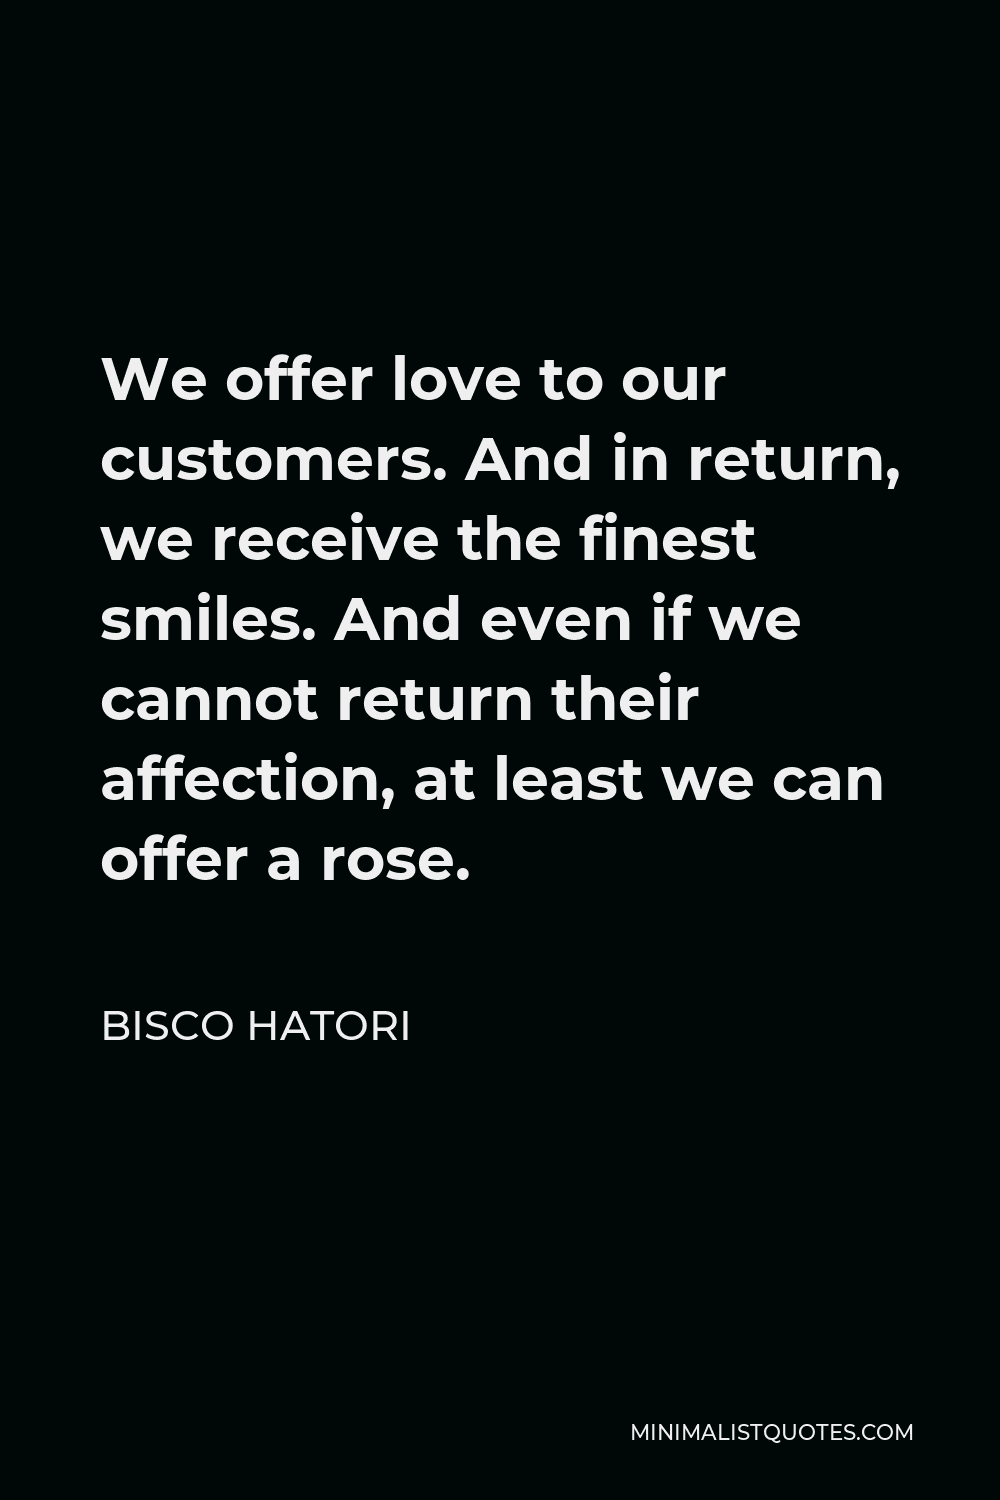 Bisco Hatori Quote - We offer love to our customers. And in return, we receive the finest smiles. And even if we cannot return their affection, at least we can offer a rose.